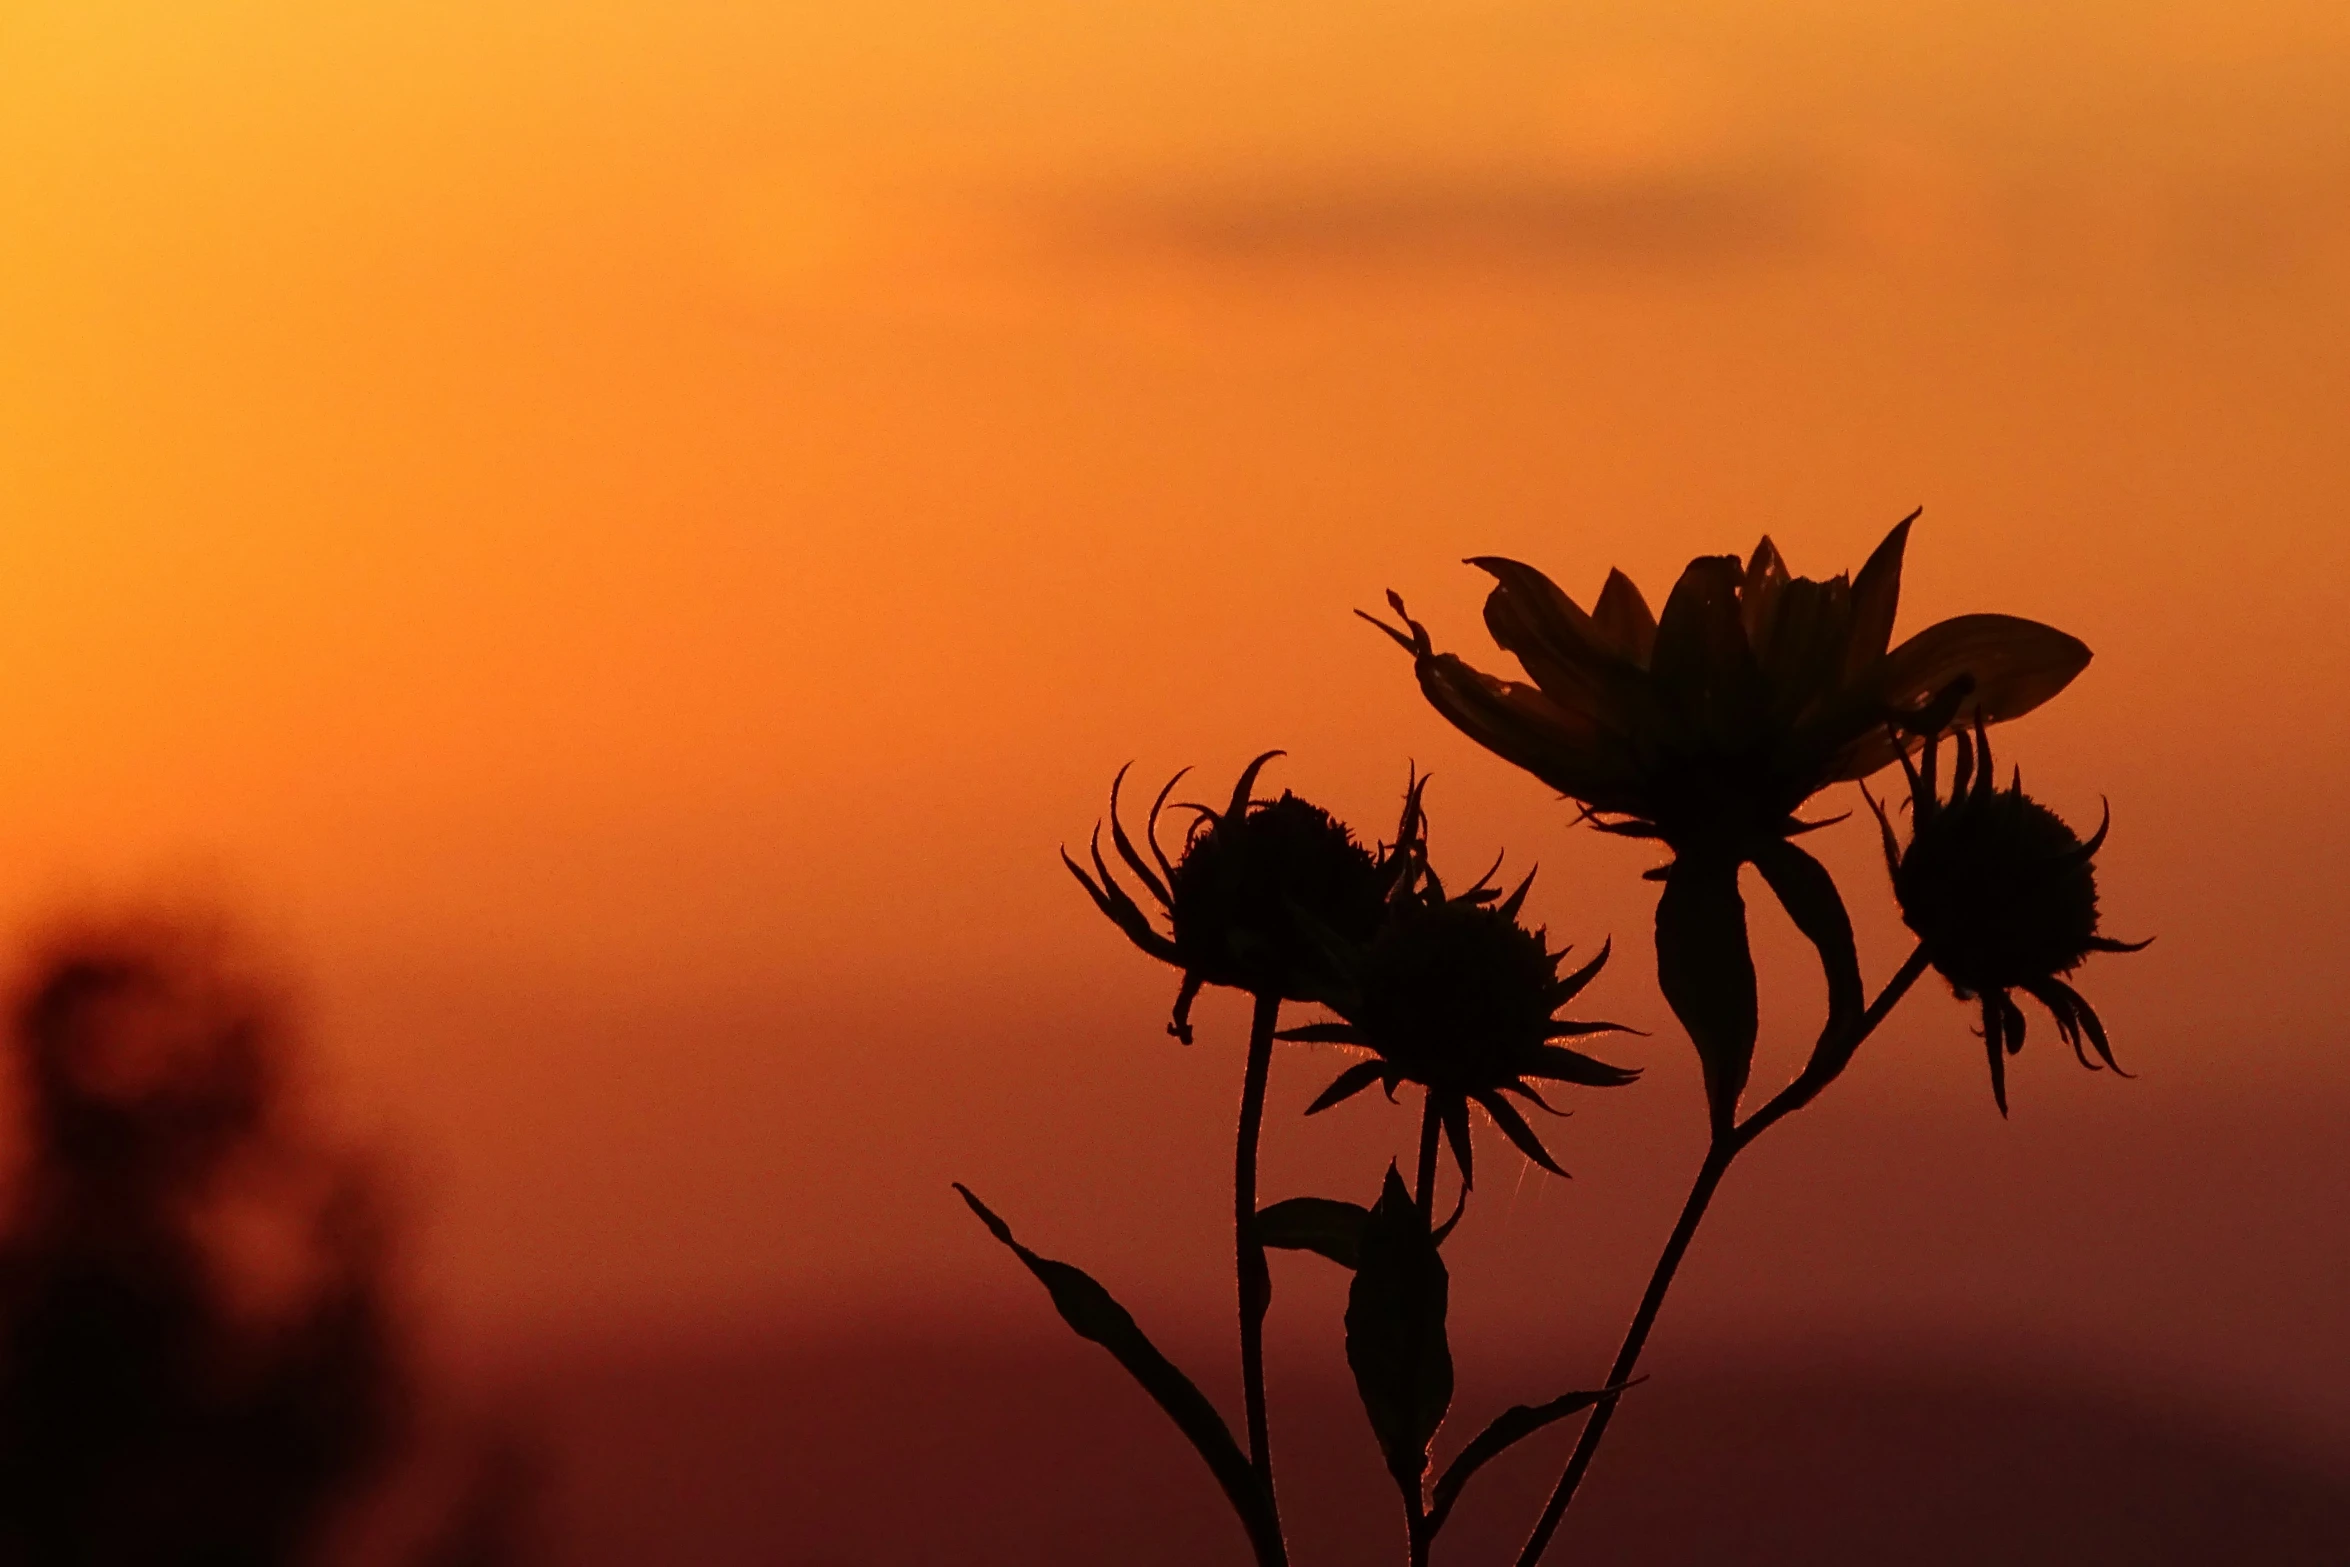 the sun is setting and a plant with flowers